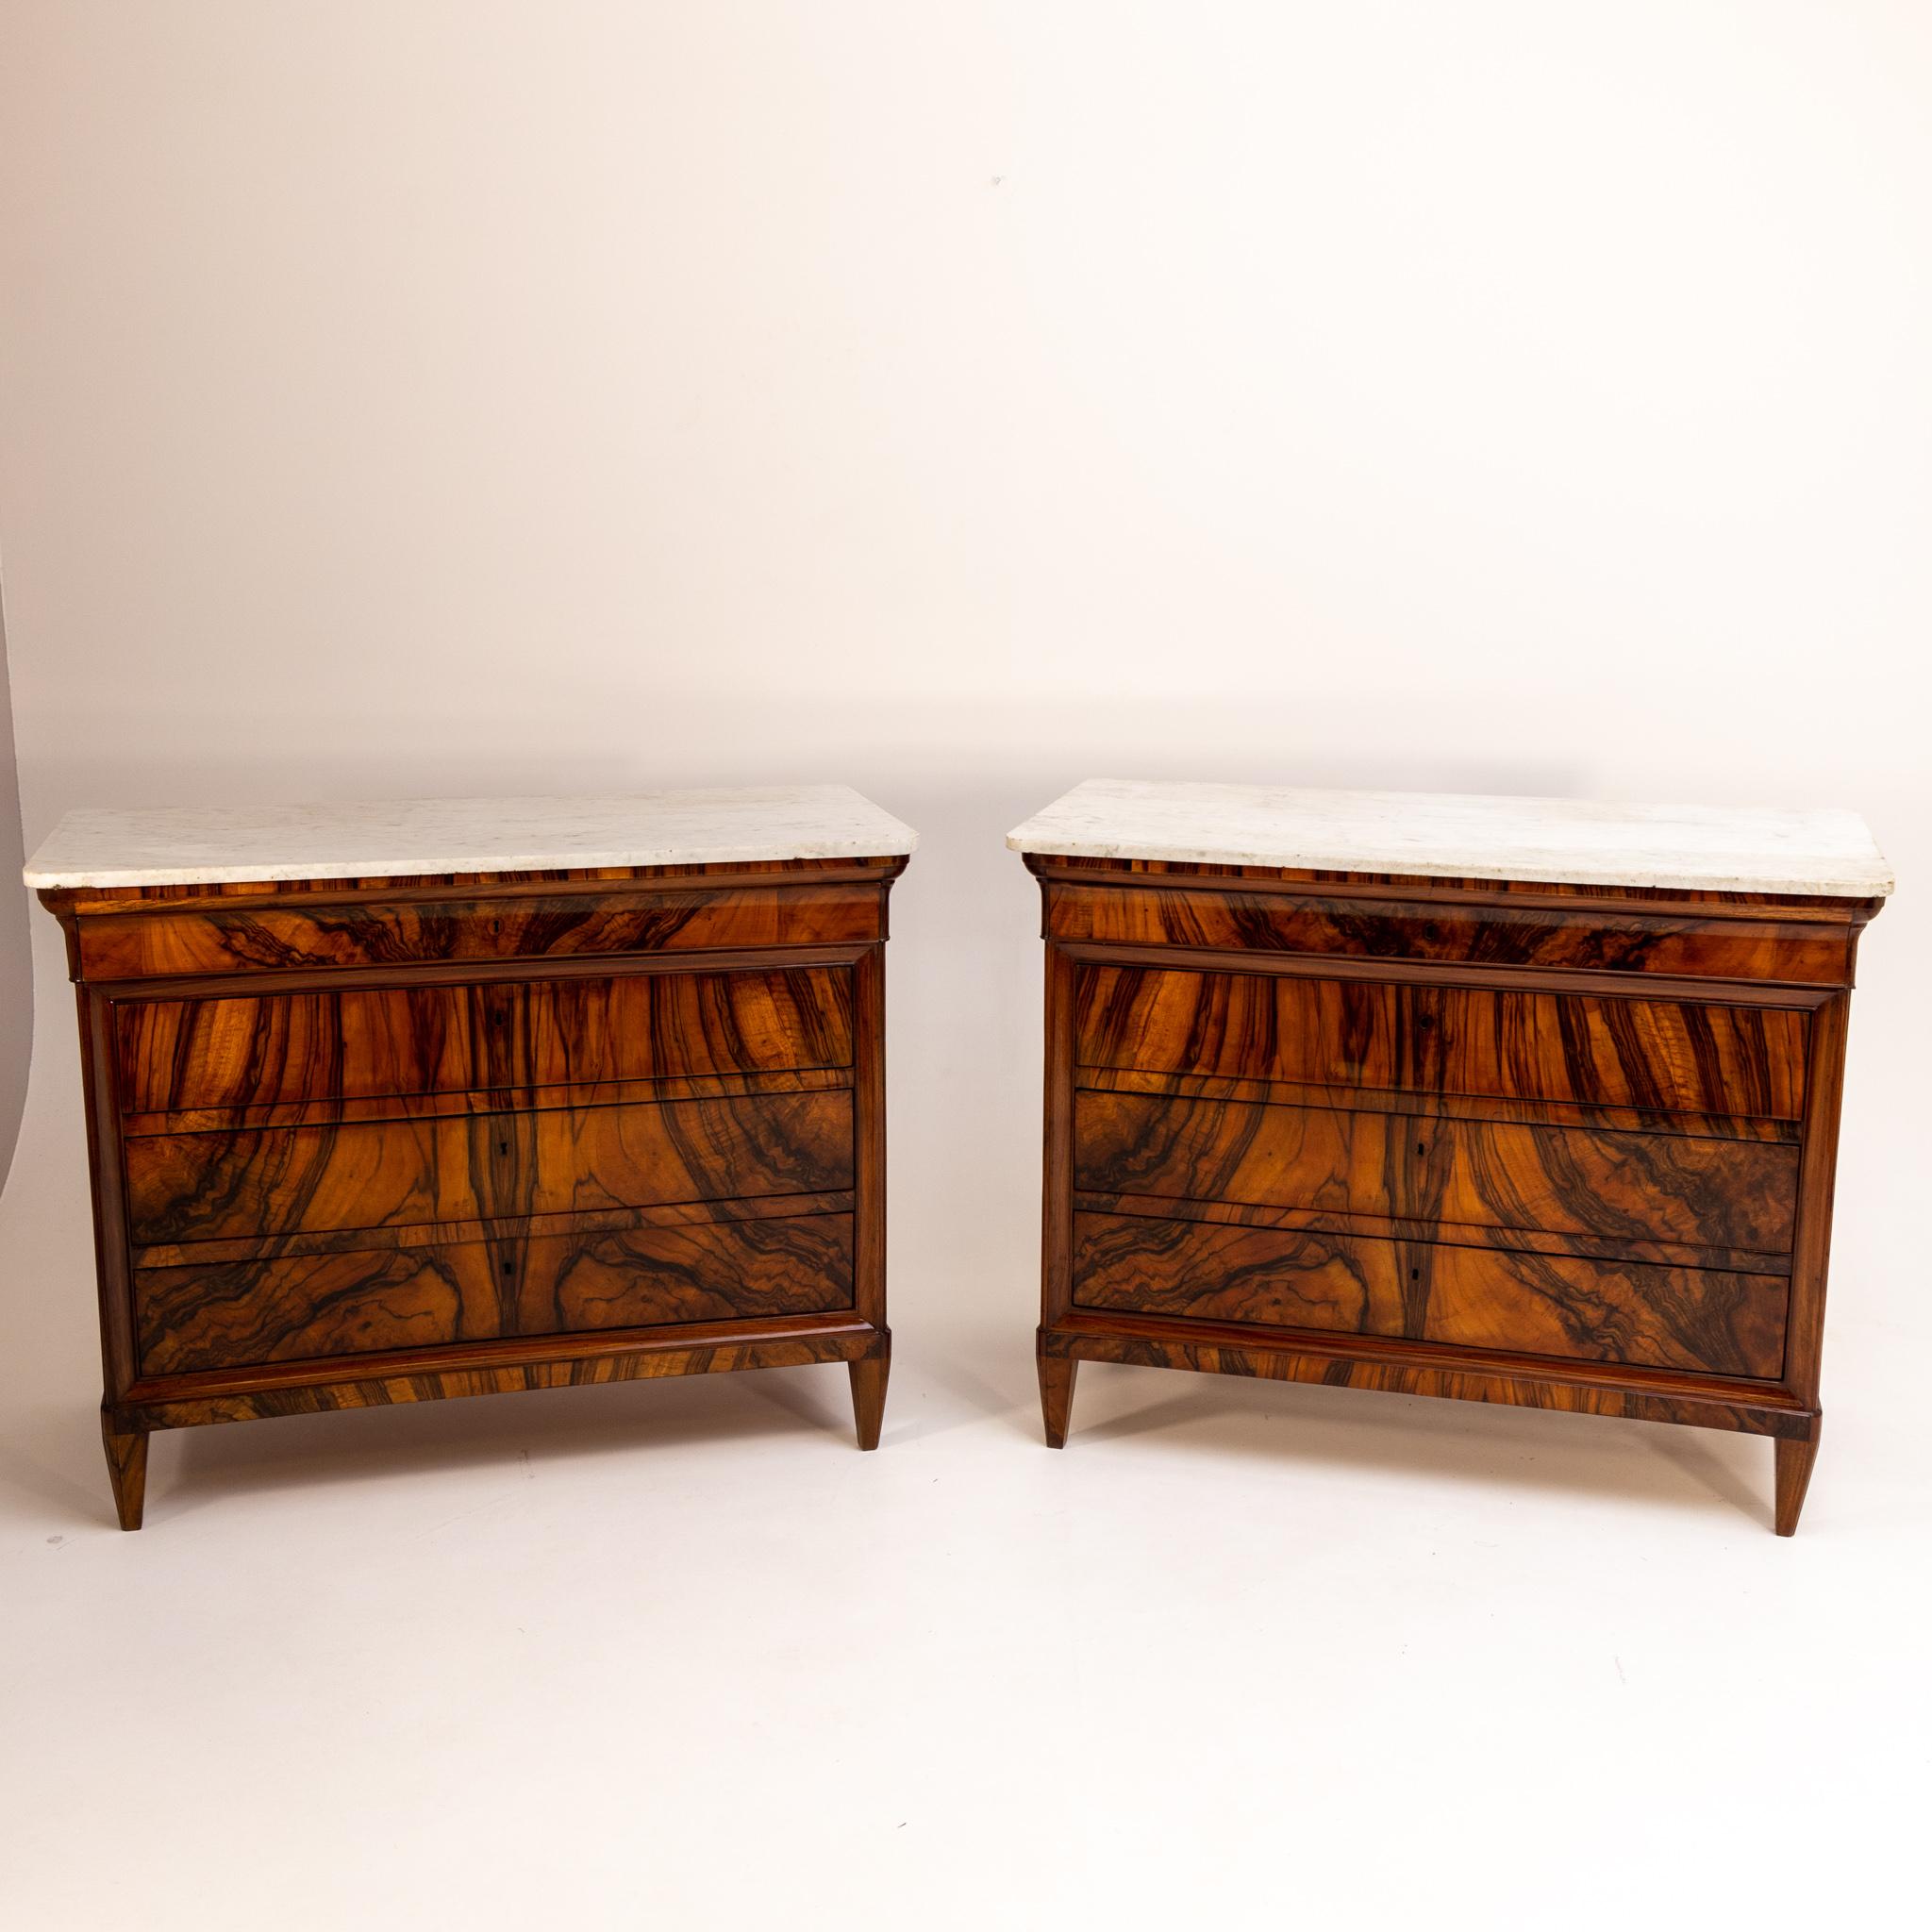 Pair of large chests of drawers with original white marble tops and four drawers. The body is veneered in walnut and has been professionally refurbished.